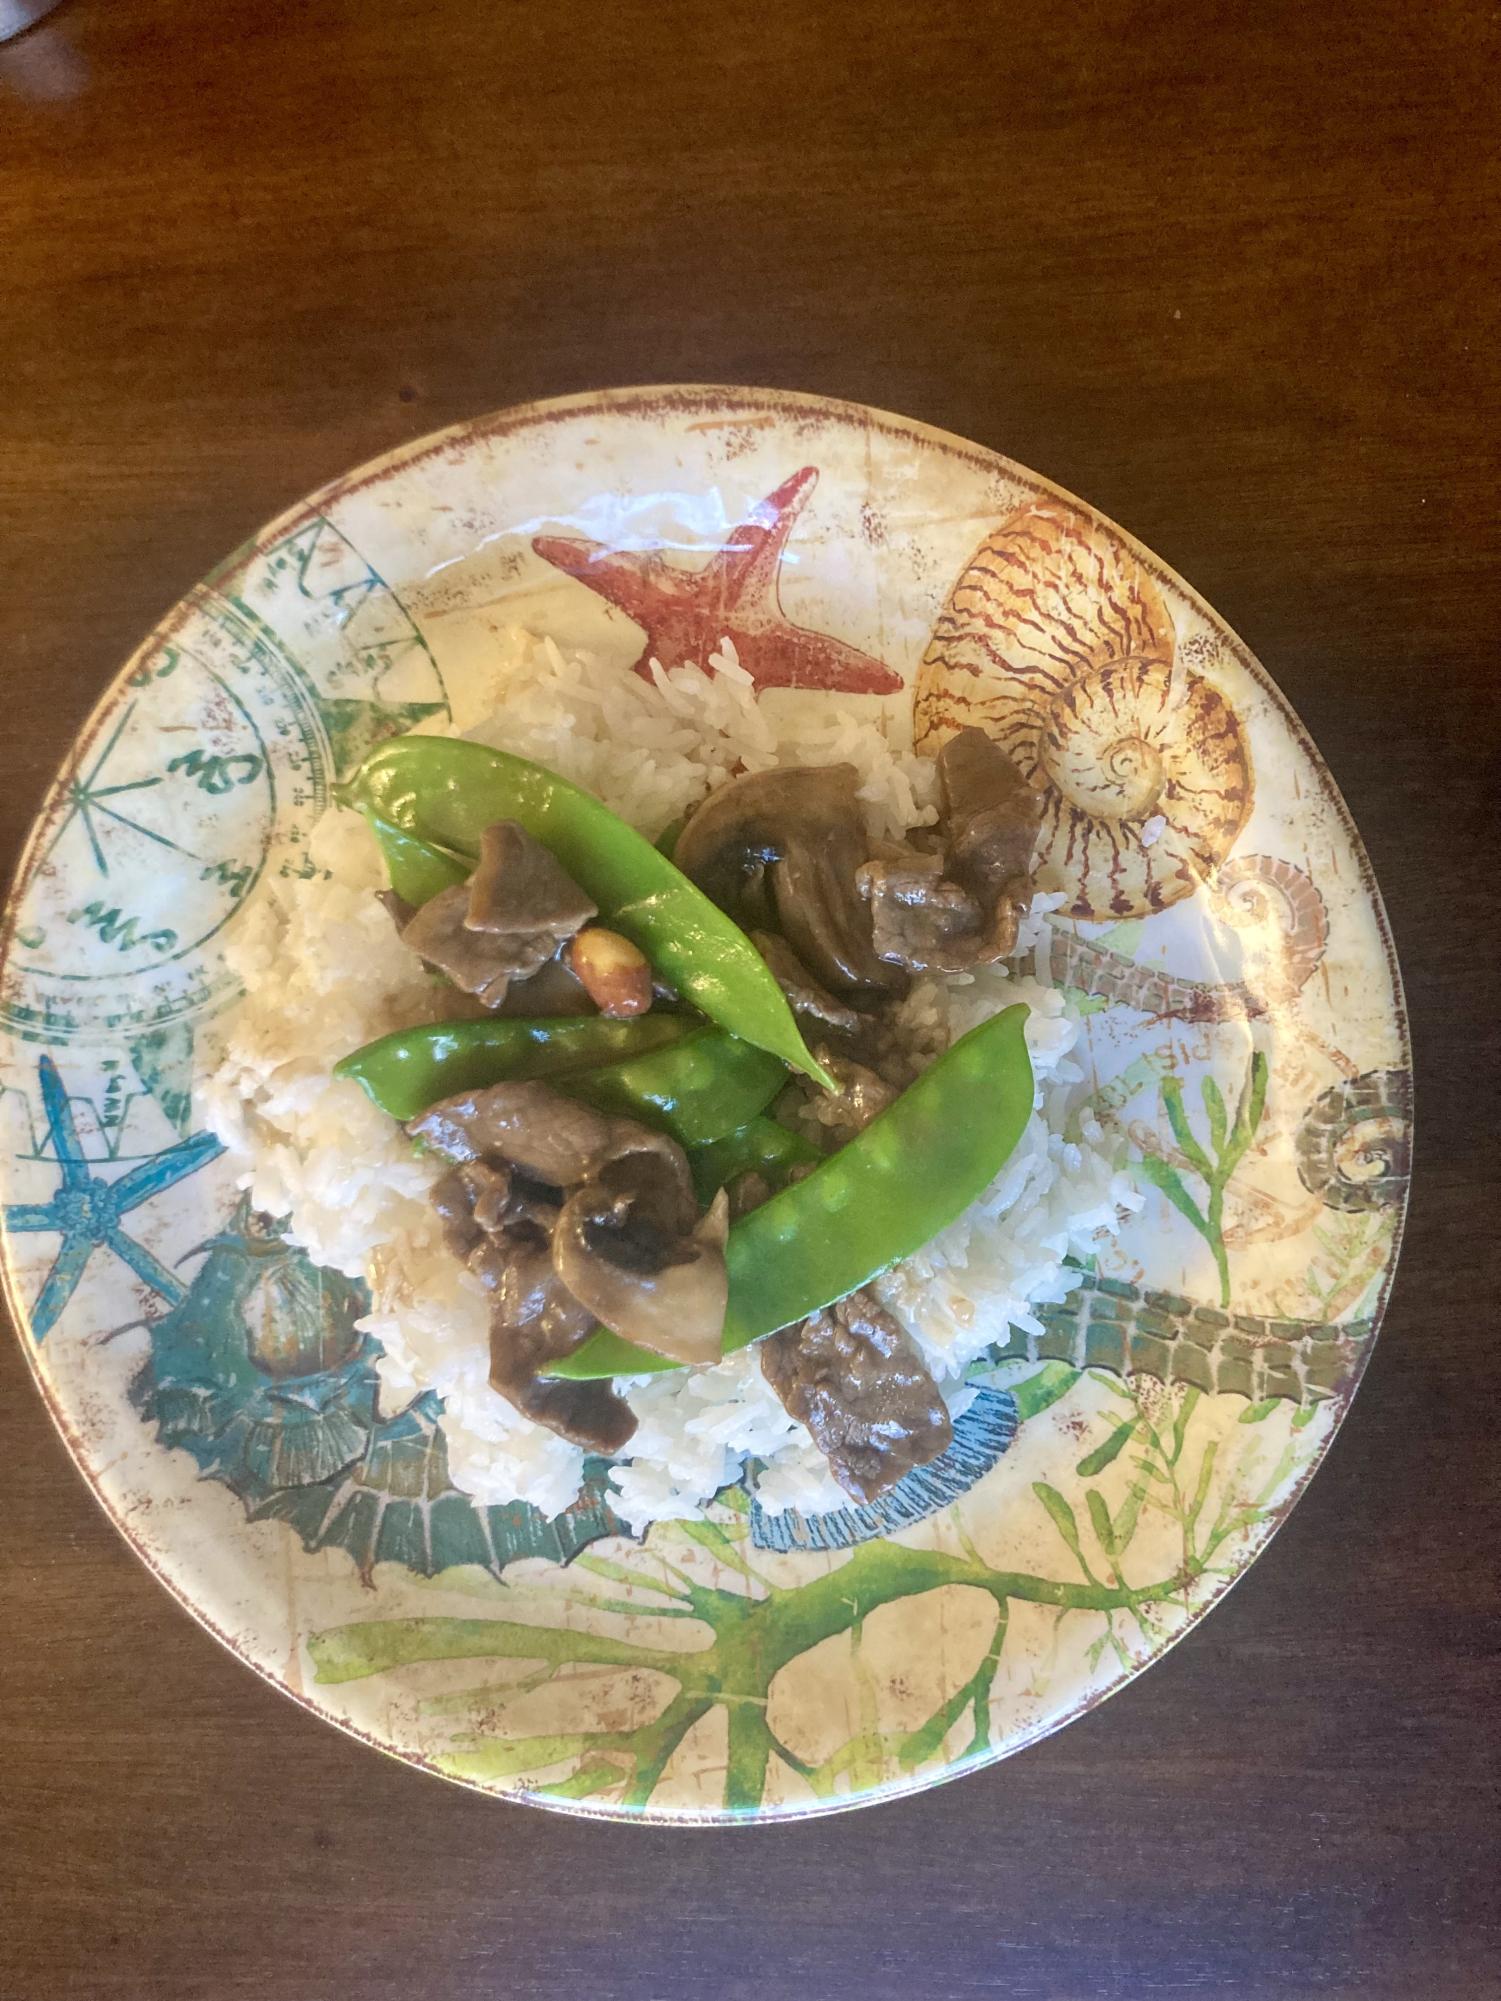 Beef stir fry over rice with mushrooms and pea pods.